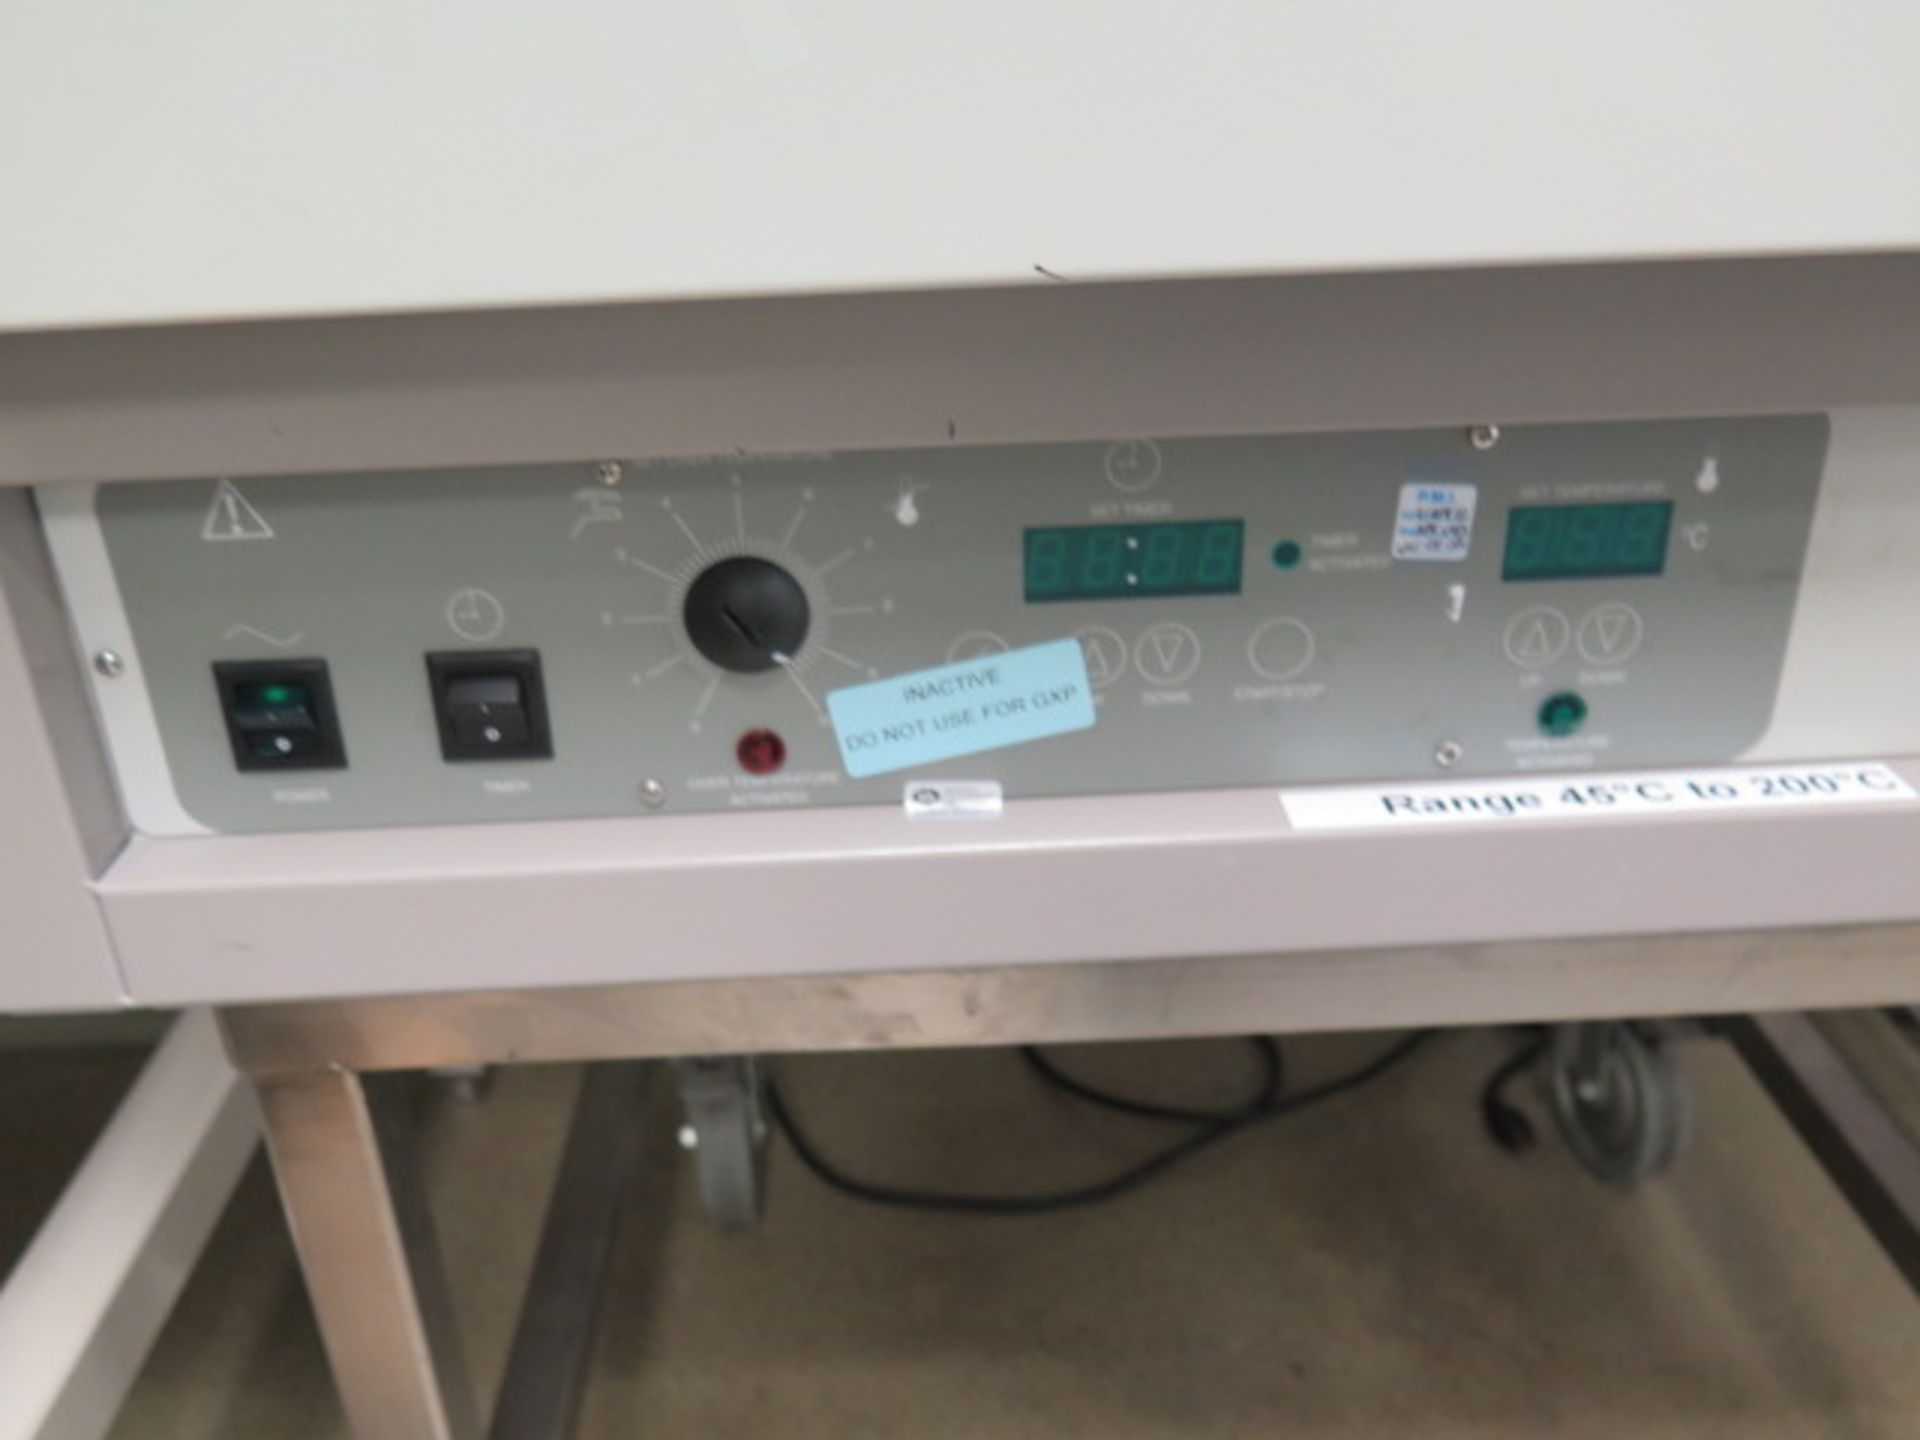 VWR mdl. 1370FM Lab Oven s/n 0700900 45-200 Degrees C (SOLD AS-IS - NO WARRANTY) - Image 6 of 7